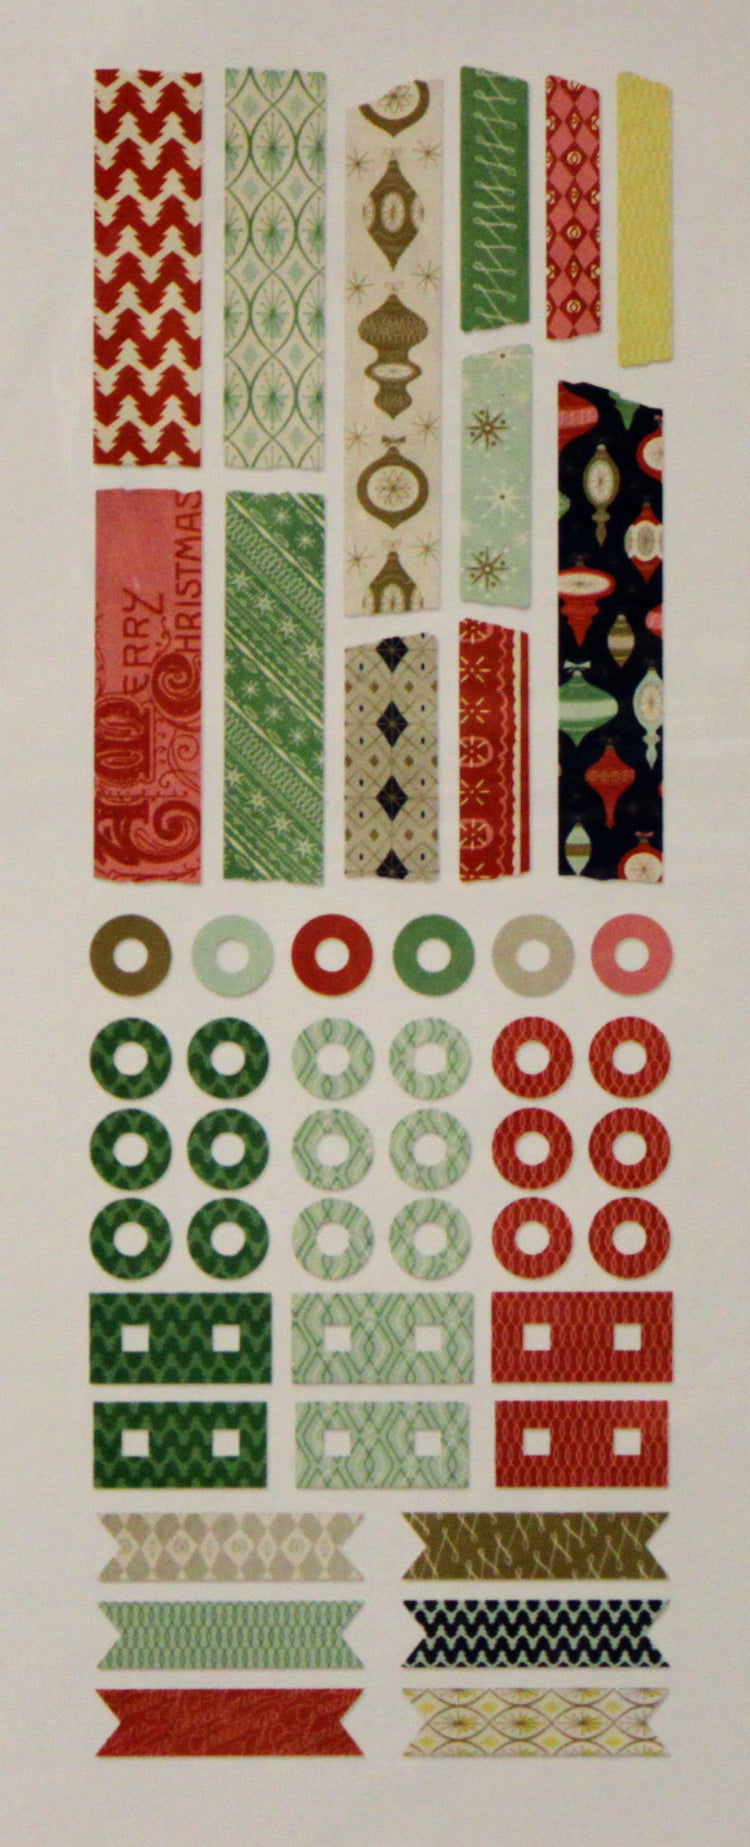 Basic Grey 25th And Pine Designer Tape Strips Stickers Embellishments